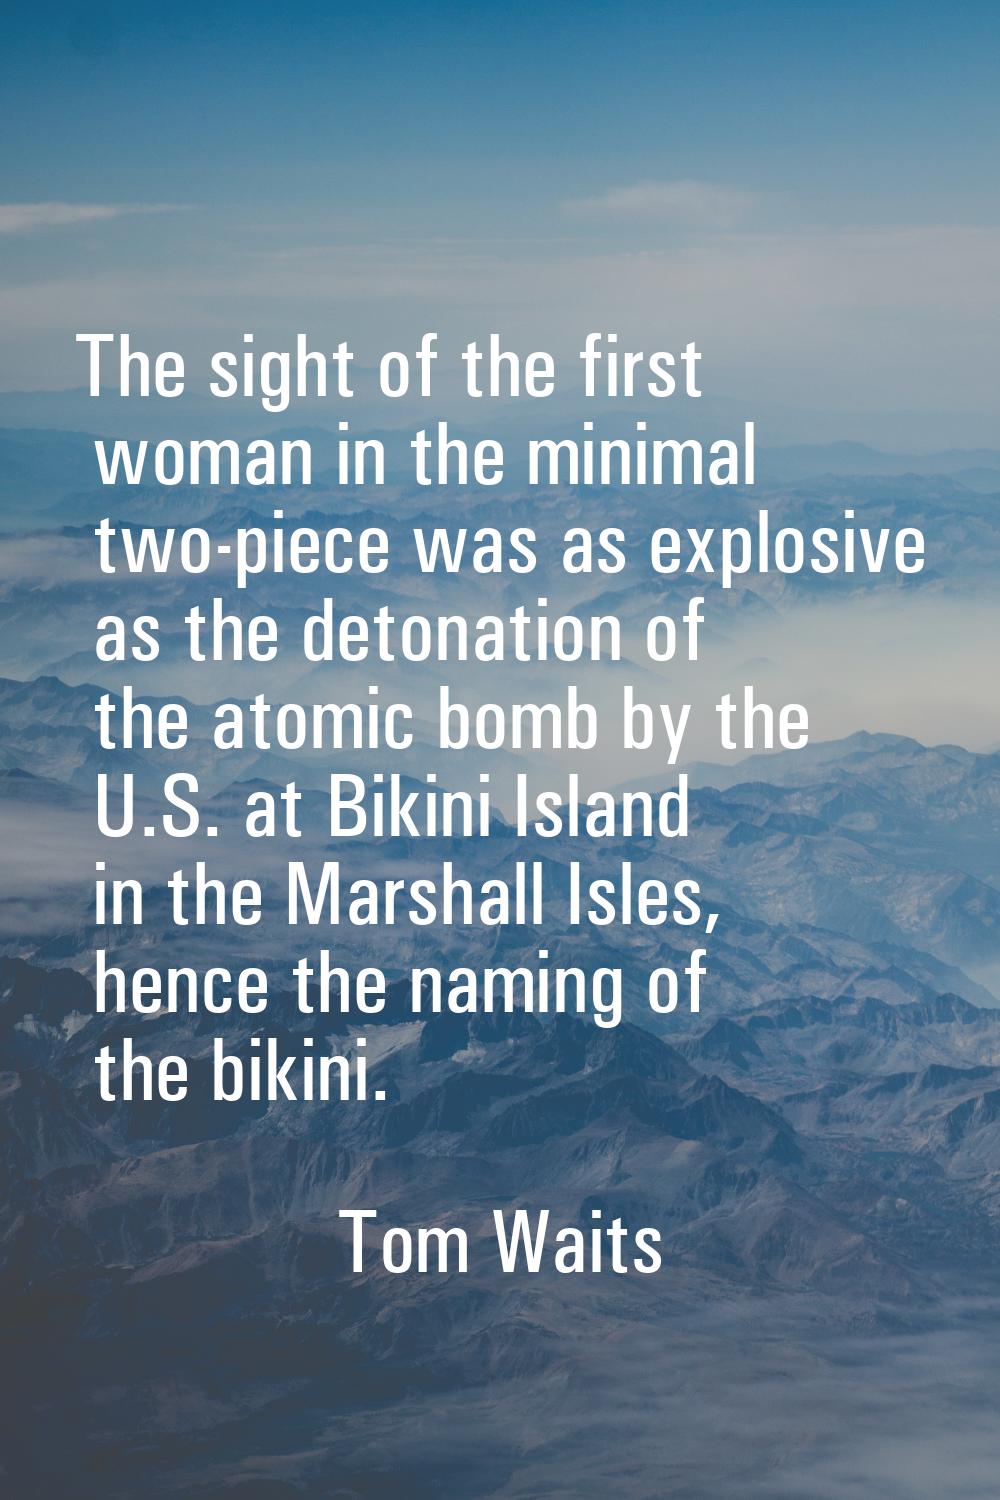 The sight of the first woman in the minimal two-piece was as explosive as the detonation of the ato